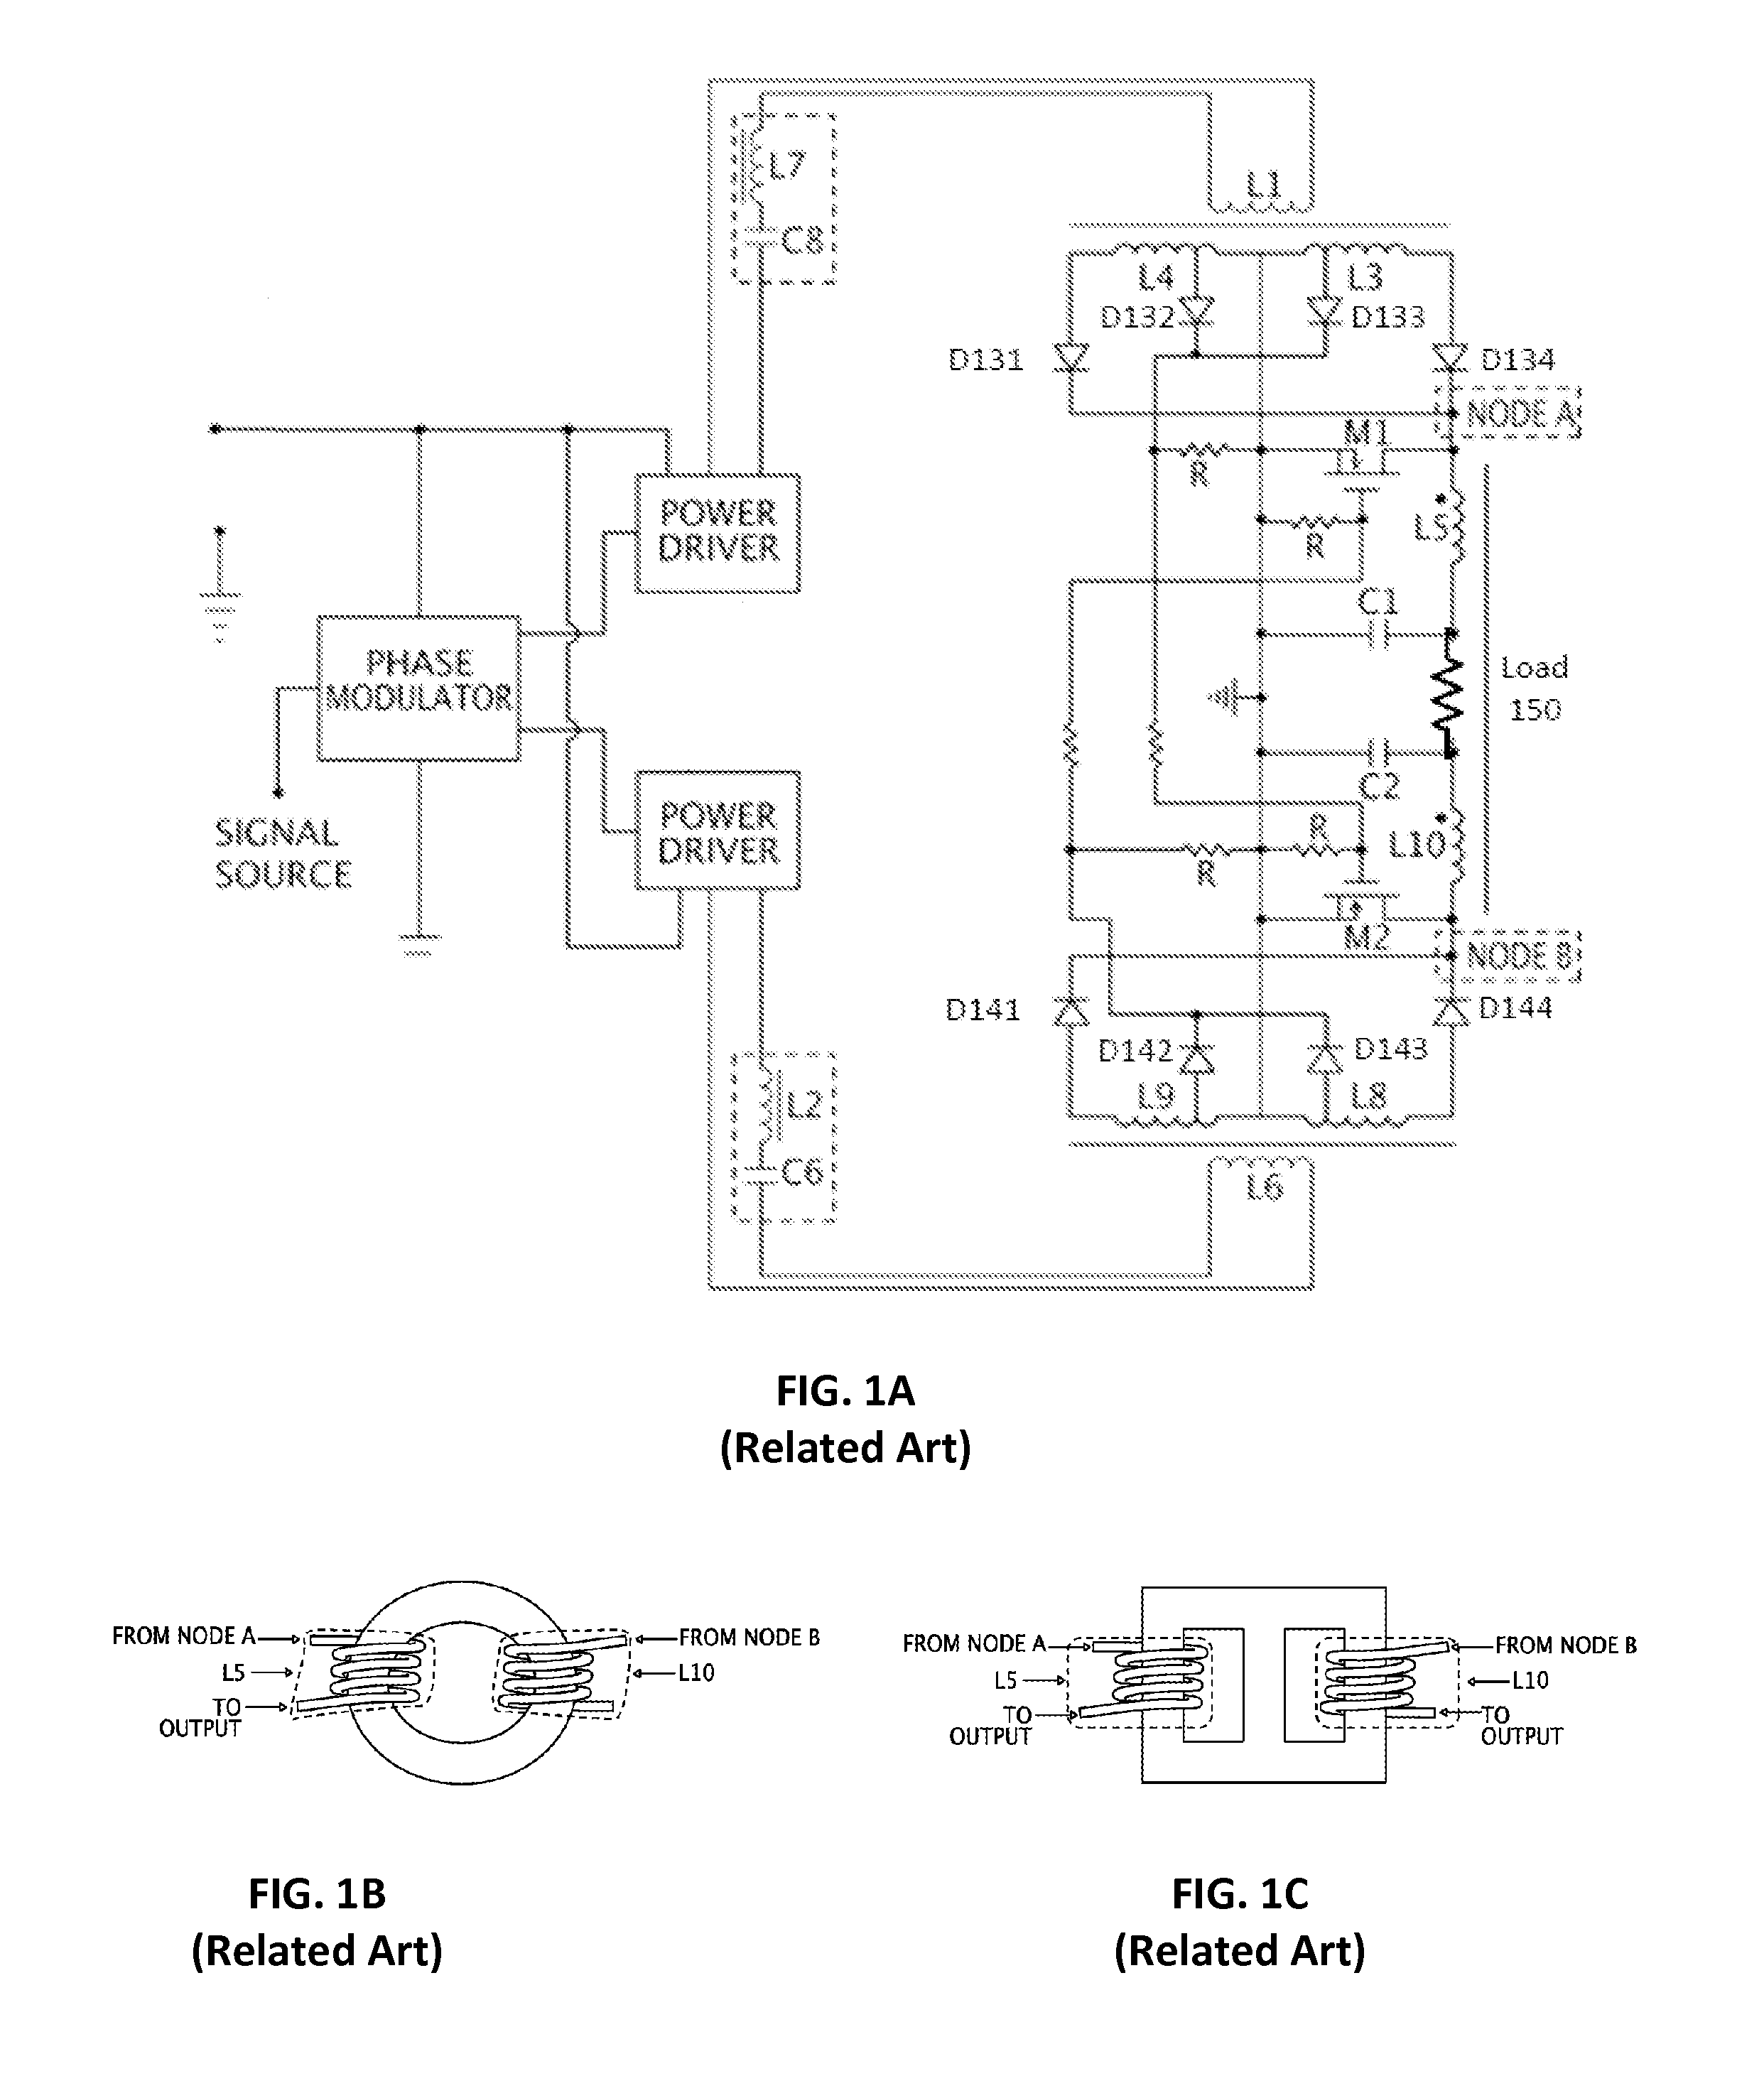 Single stage switching power amplifier with bidirectional energy flow